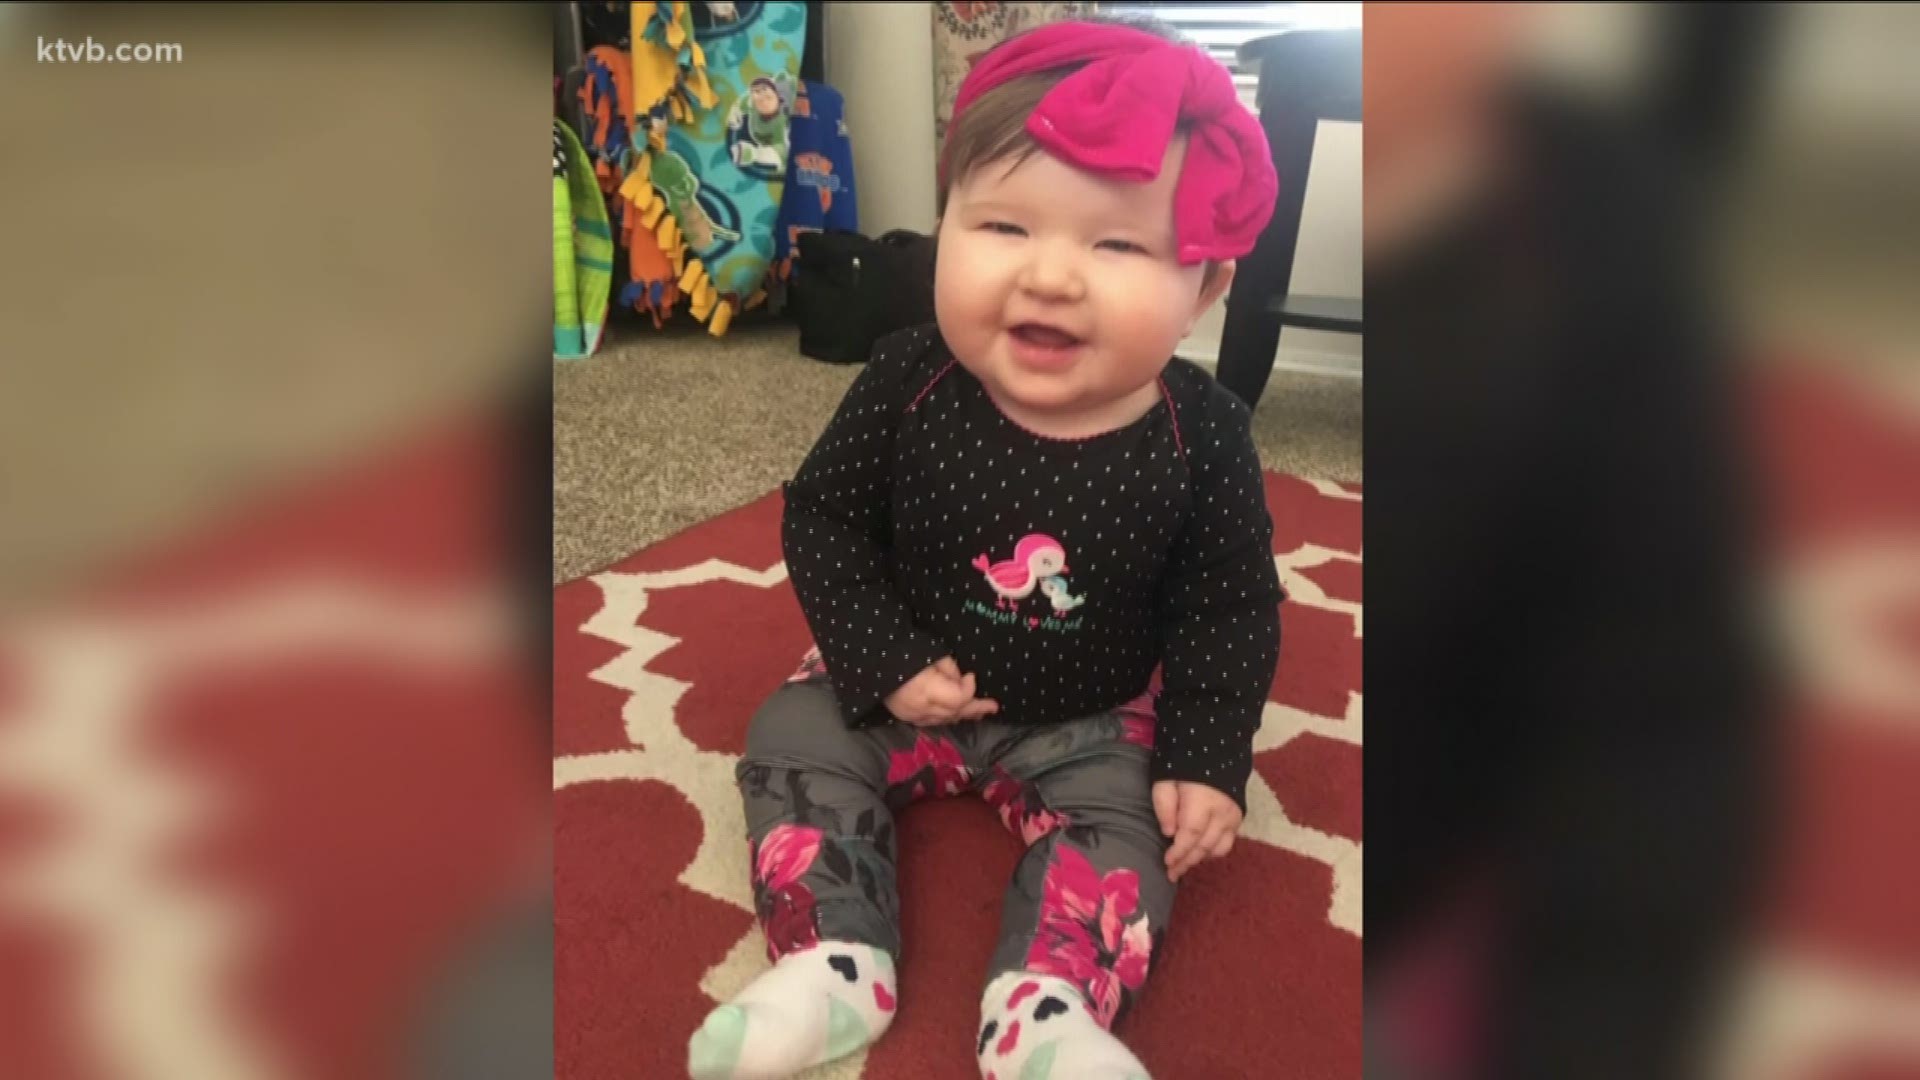 Months after being born, Emma's parents knew something wasn't quite right. Now her parents are working to raise money to find a cure to the genetic disorder.